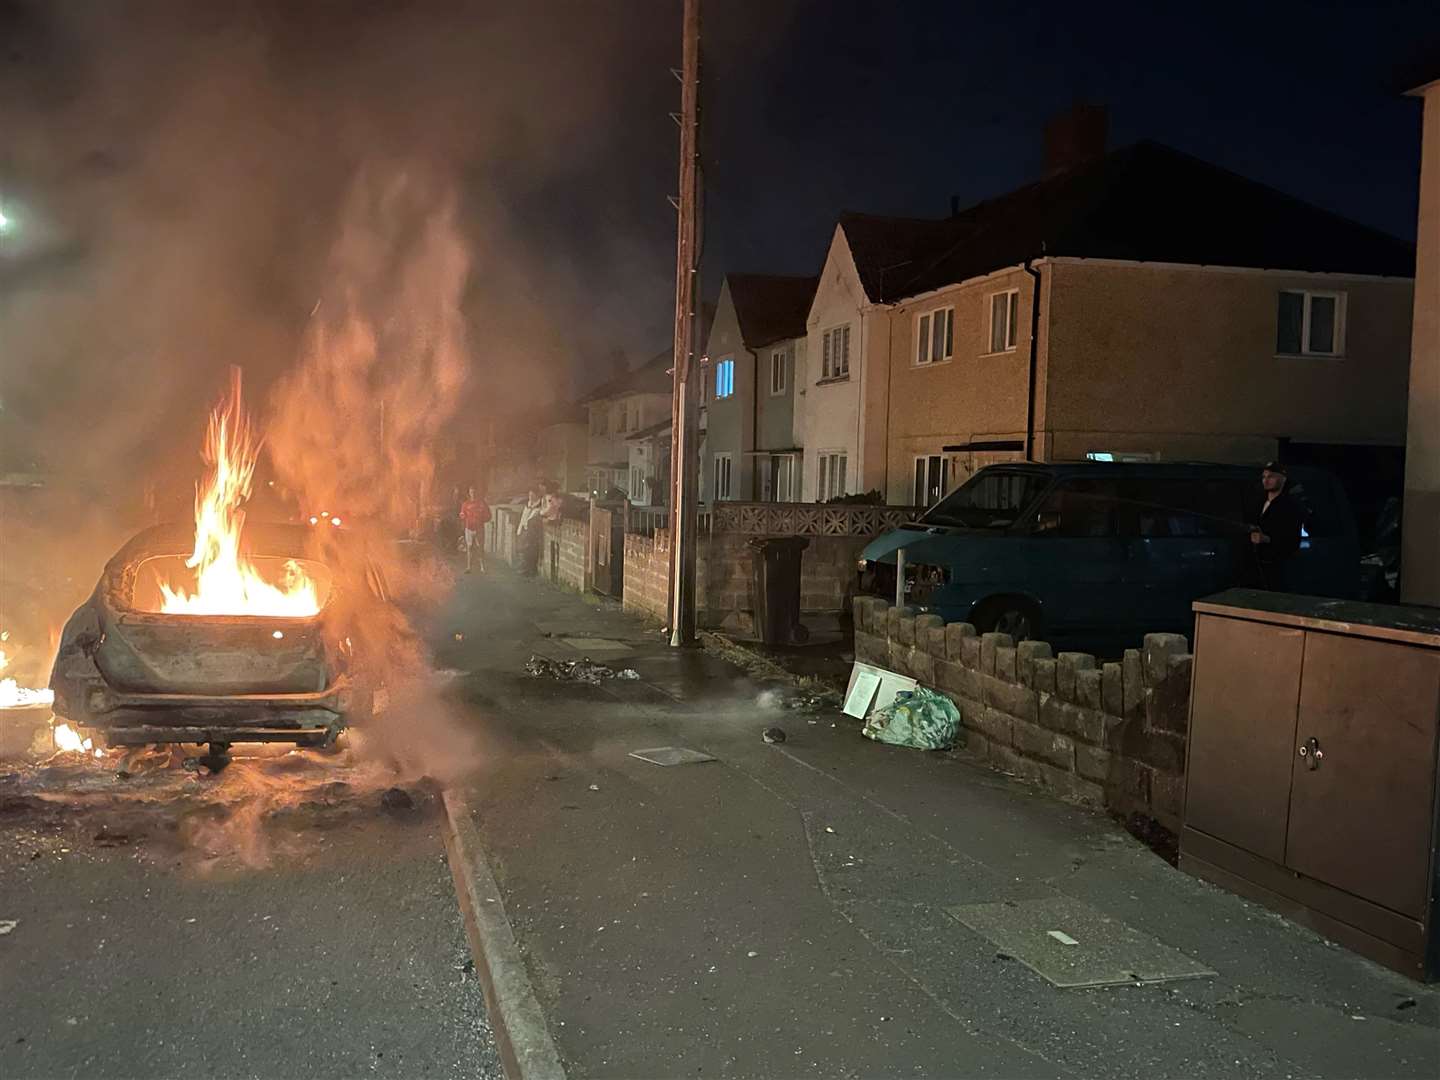 The Ford Focus car of Jane Palmer set alight on Highmead Road, Ely (Bronwen Weatherby/PA)